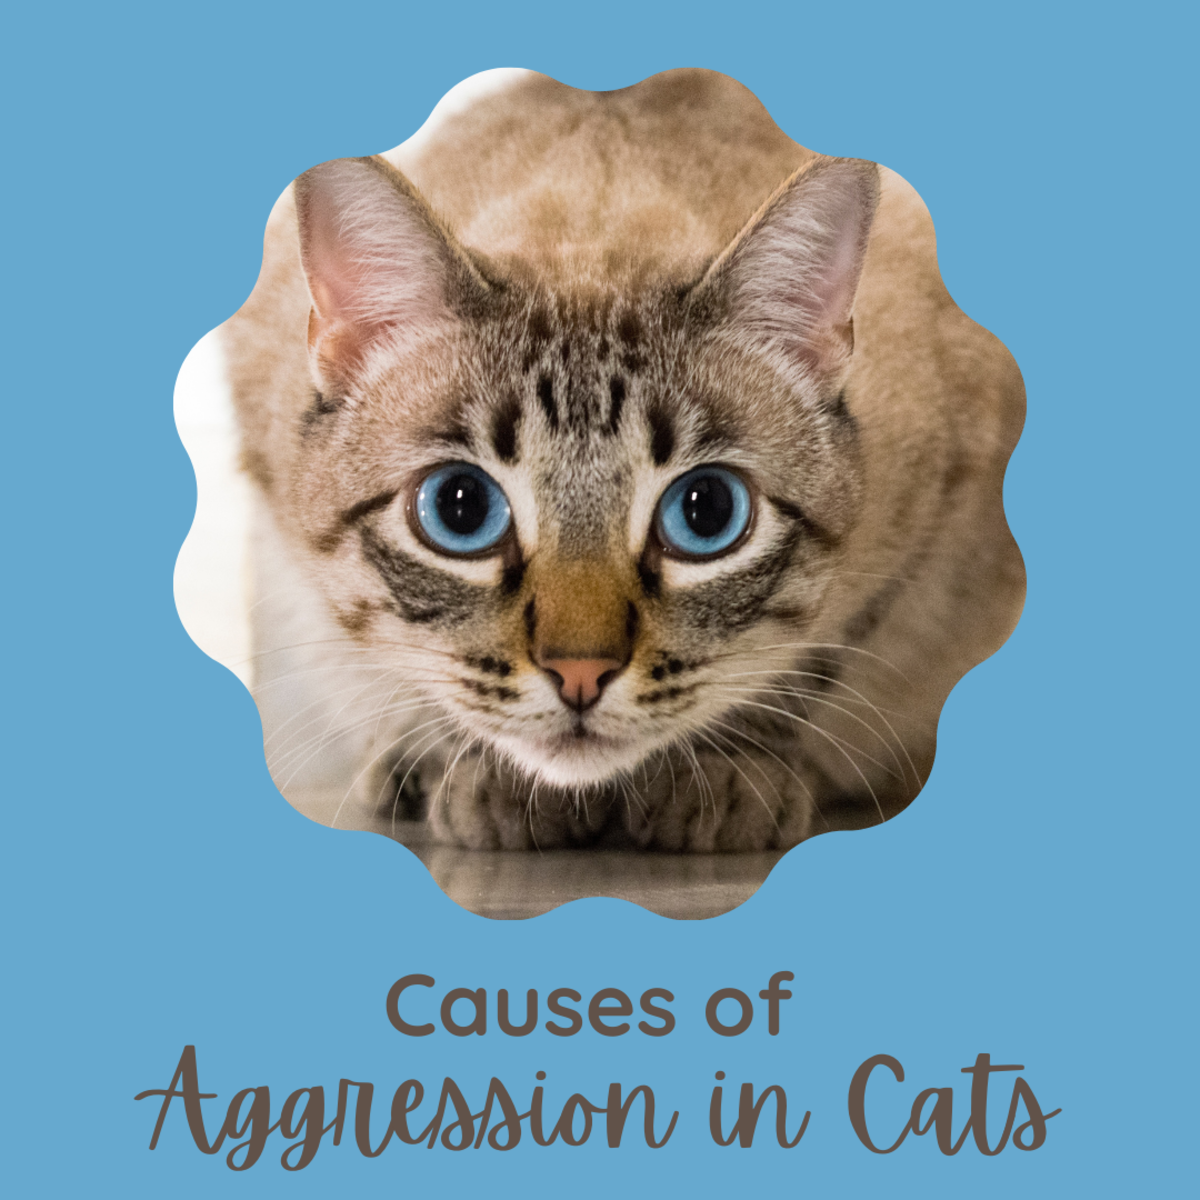 Physical and psychological causes of aggression in cats